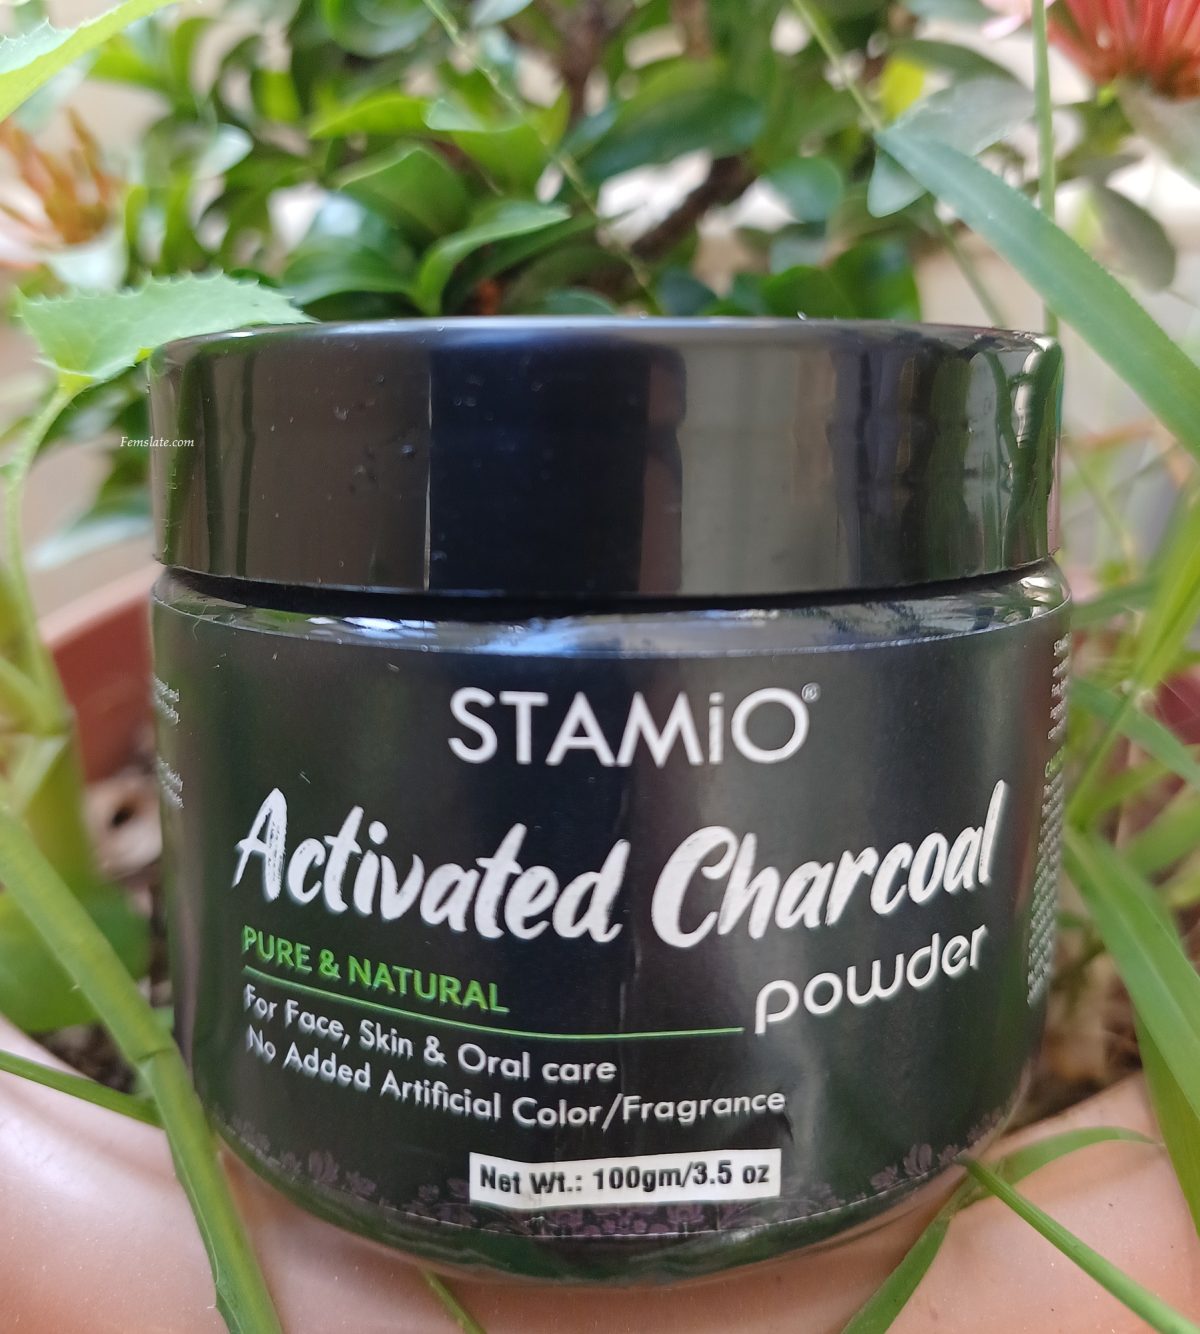 Stamio Activate Charcoal Powder Review